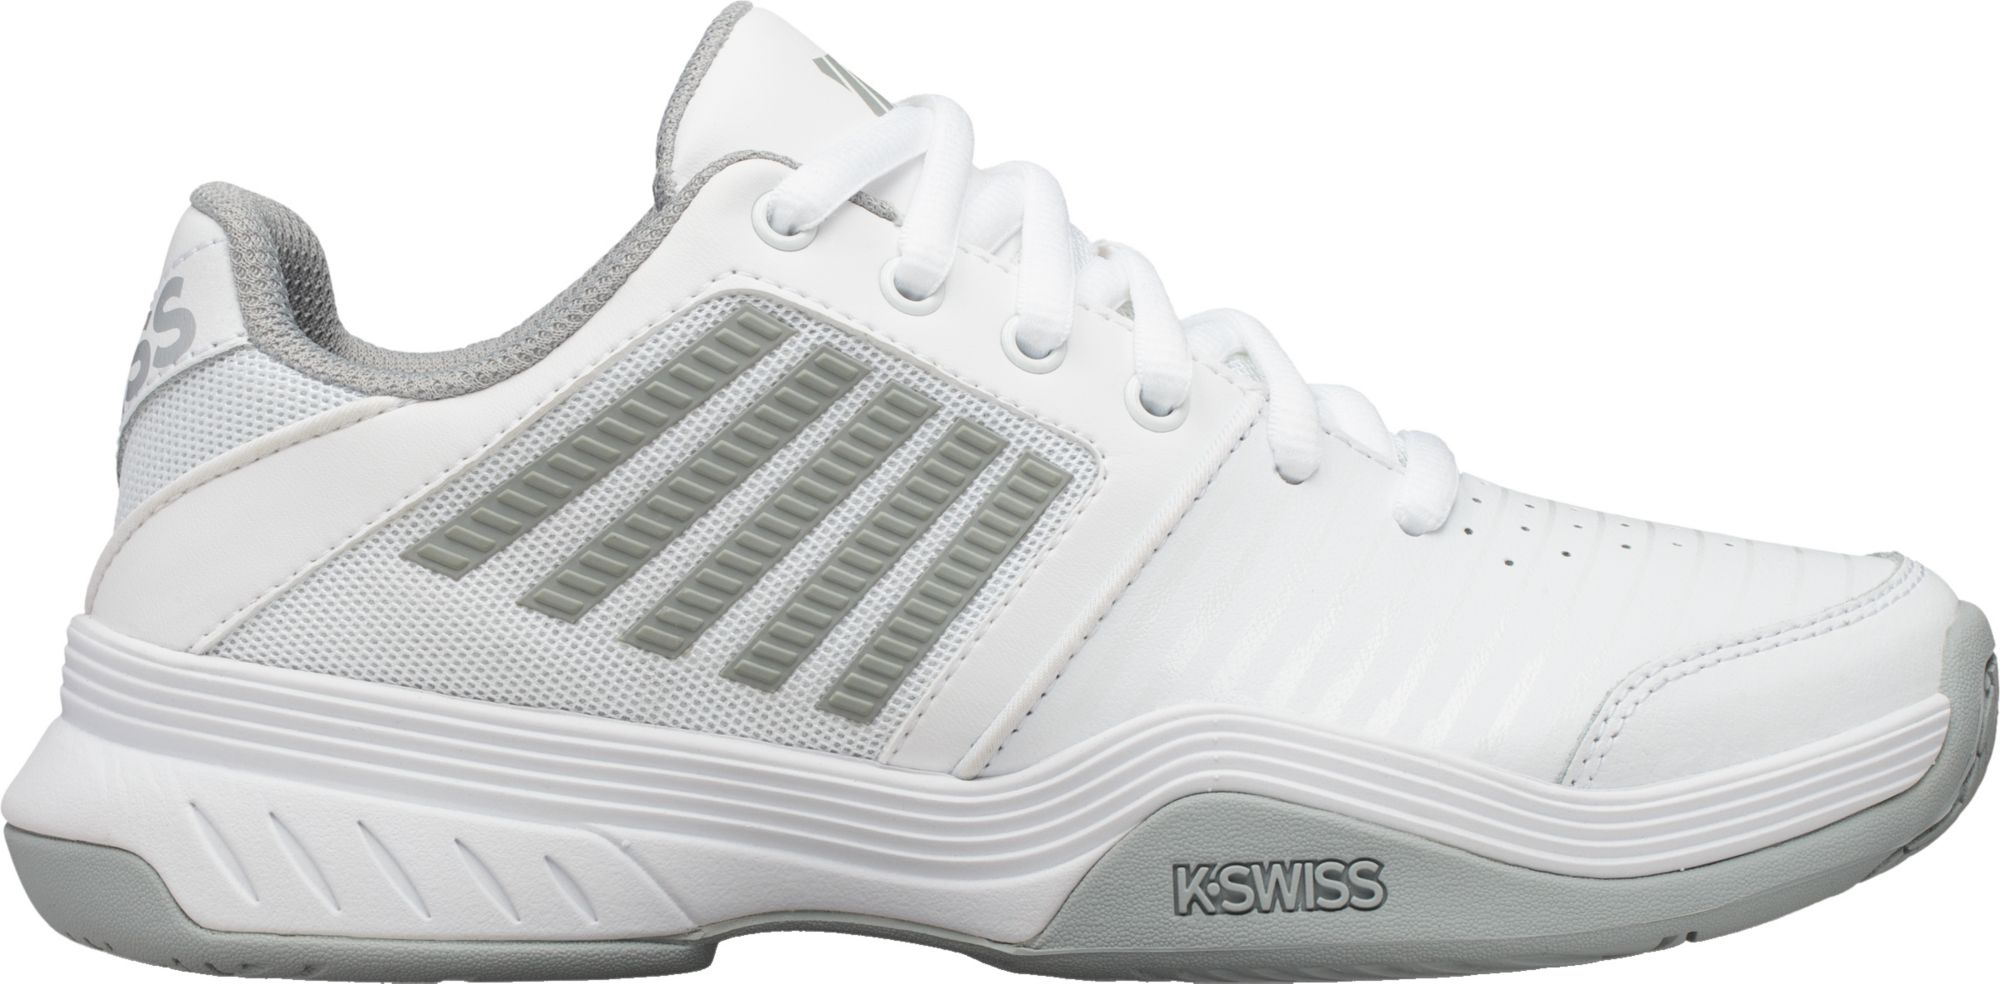 where to buy k swiss shoes near me